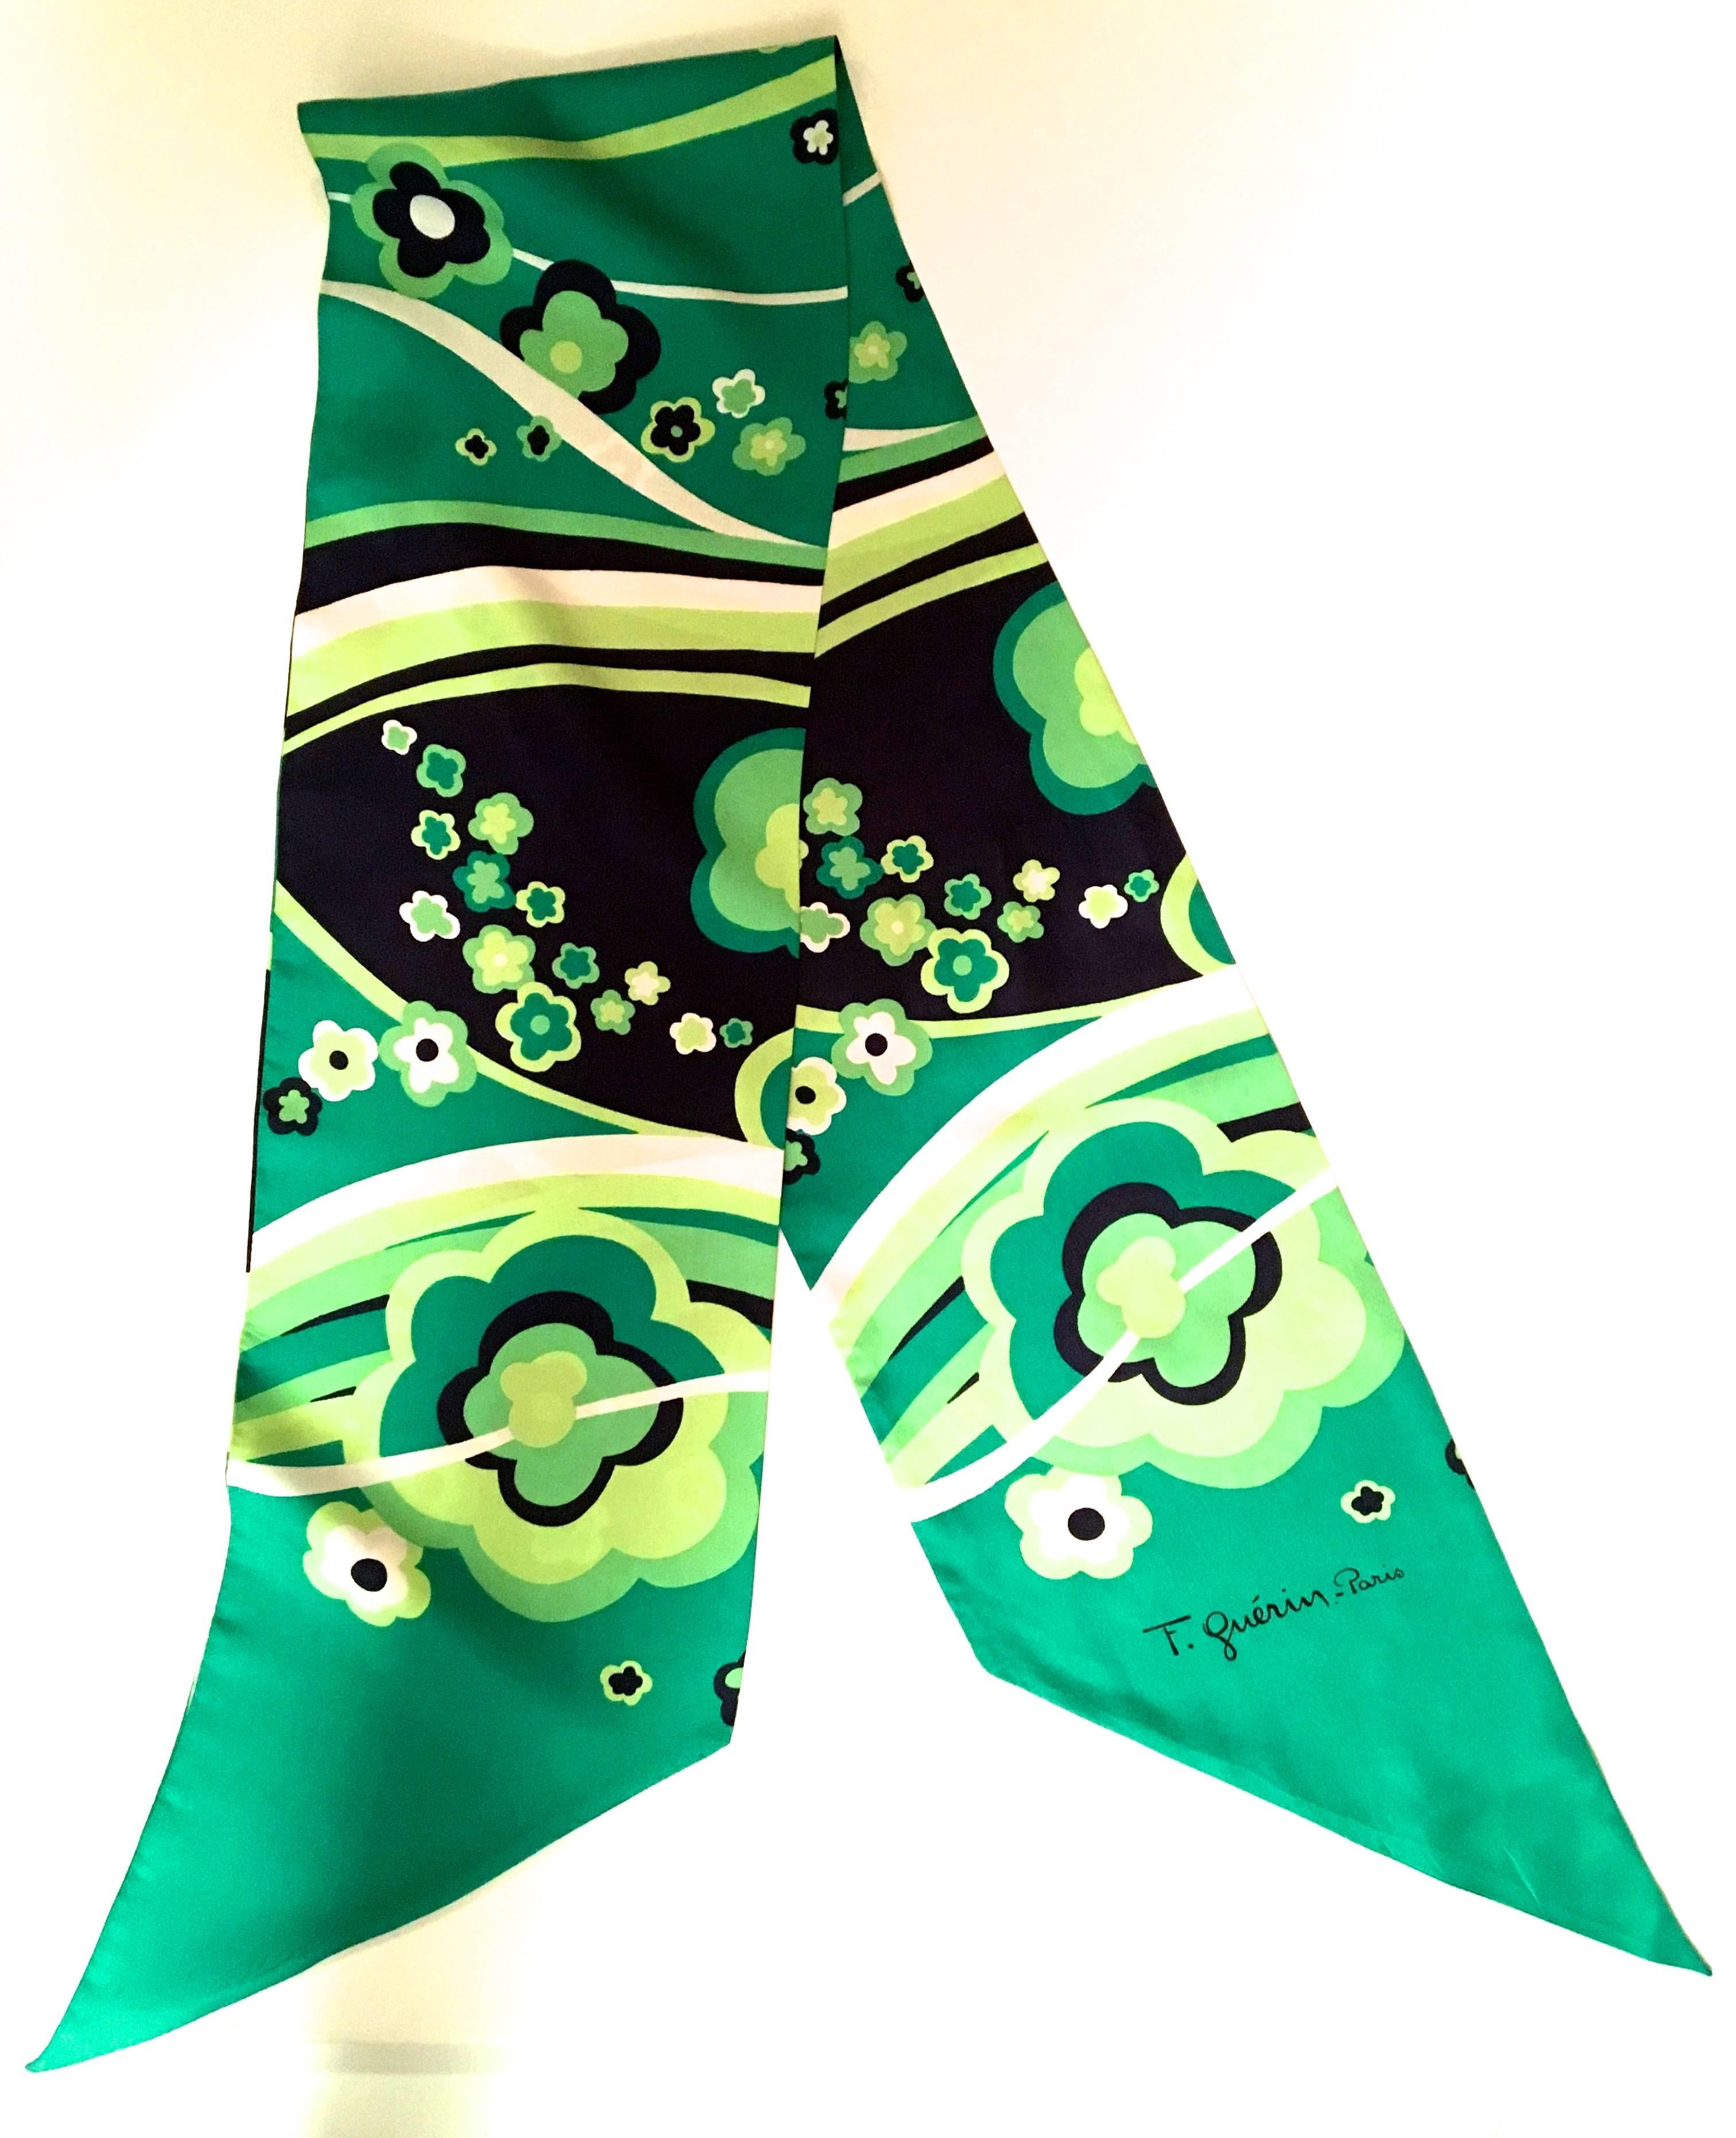 Presented here is a lovely vintage scarf from F. Guerin Paris from the 1970's. The scarf is comprised of varying shades of green, dark blue, and white. The scarf is a geometric floral print typical of the era. The total length of the scarf is 55